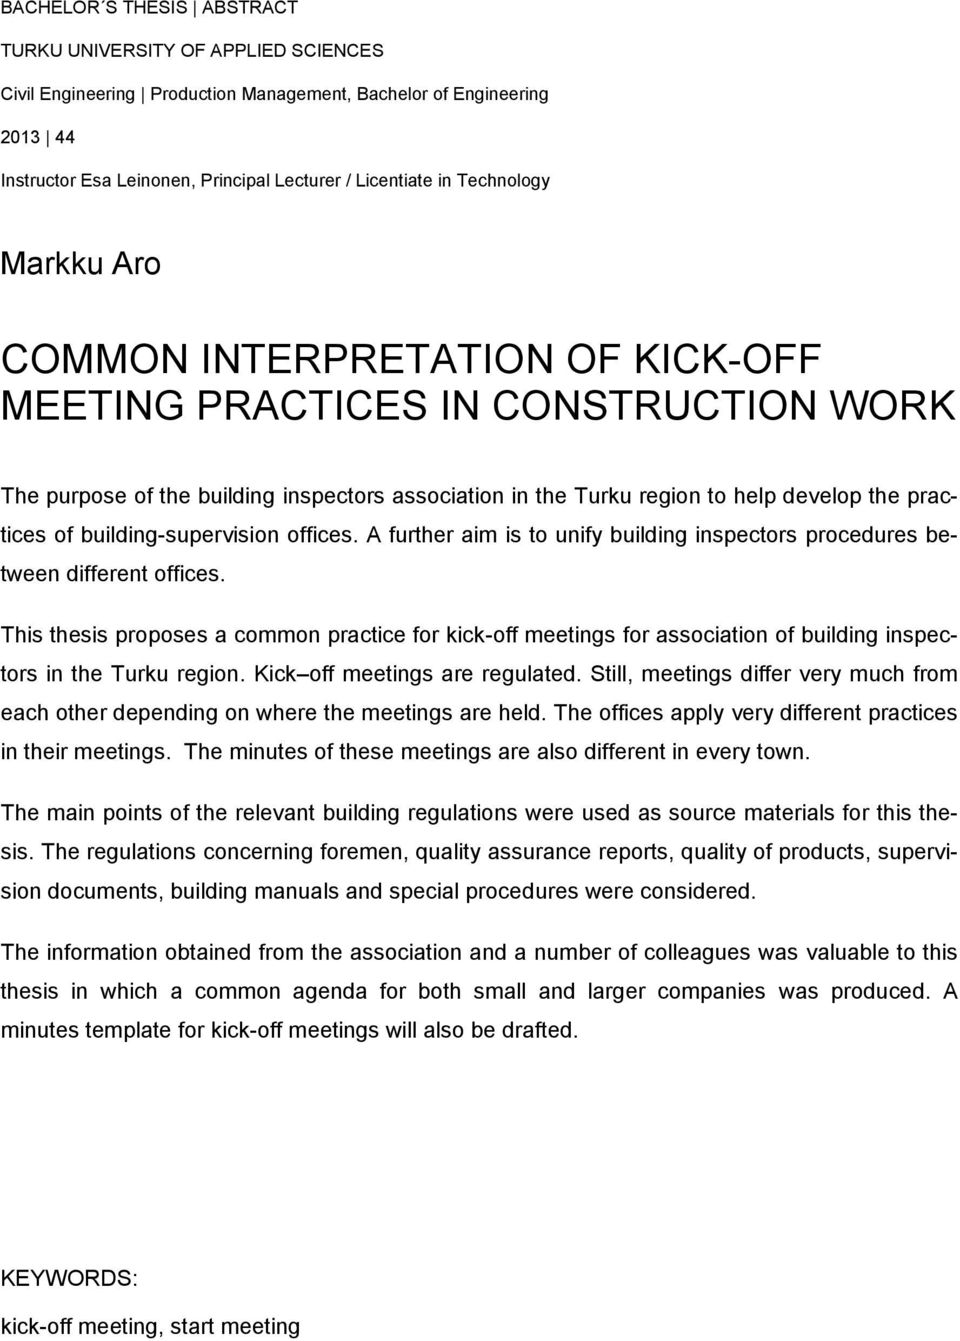 building-supervision offices. A further aim is to unify building inspectors procedures between different offices.